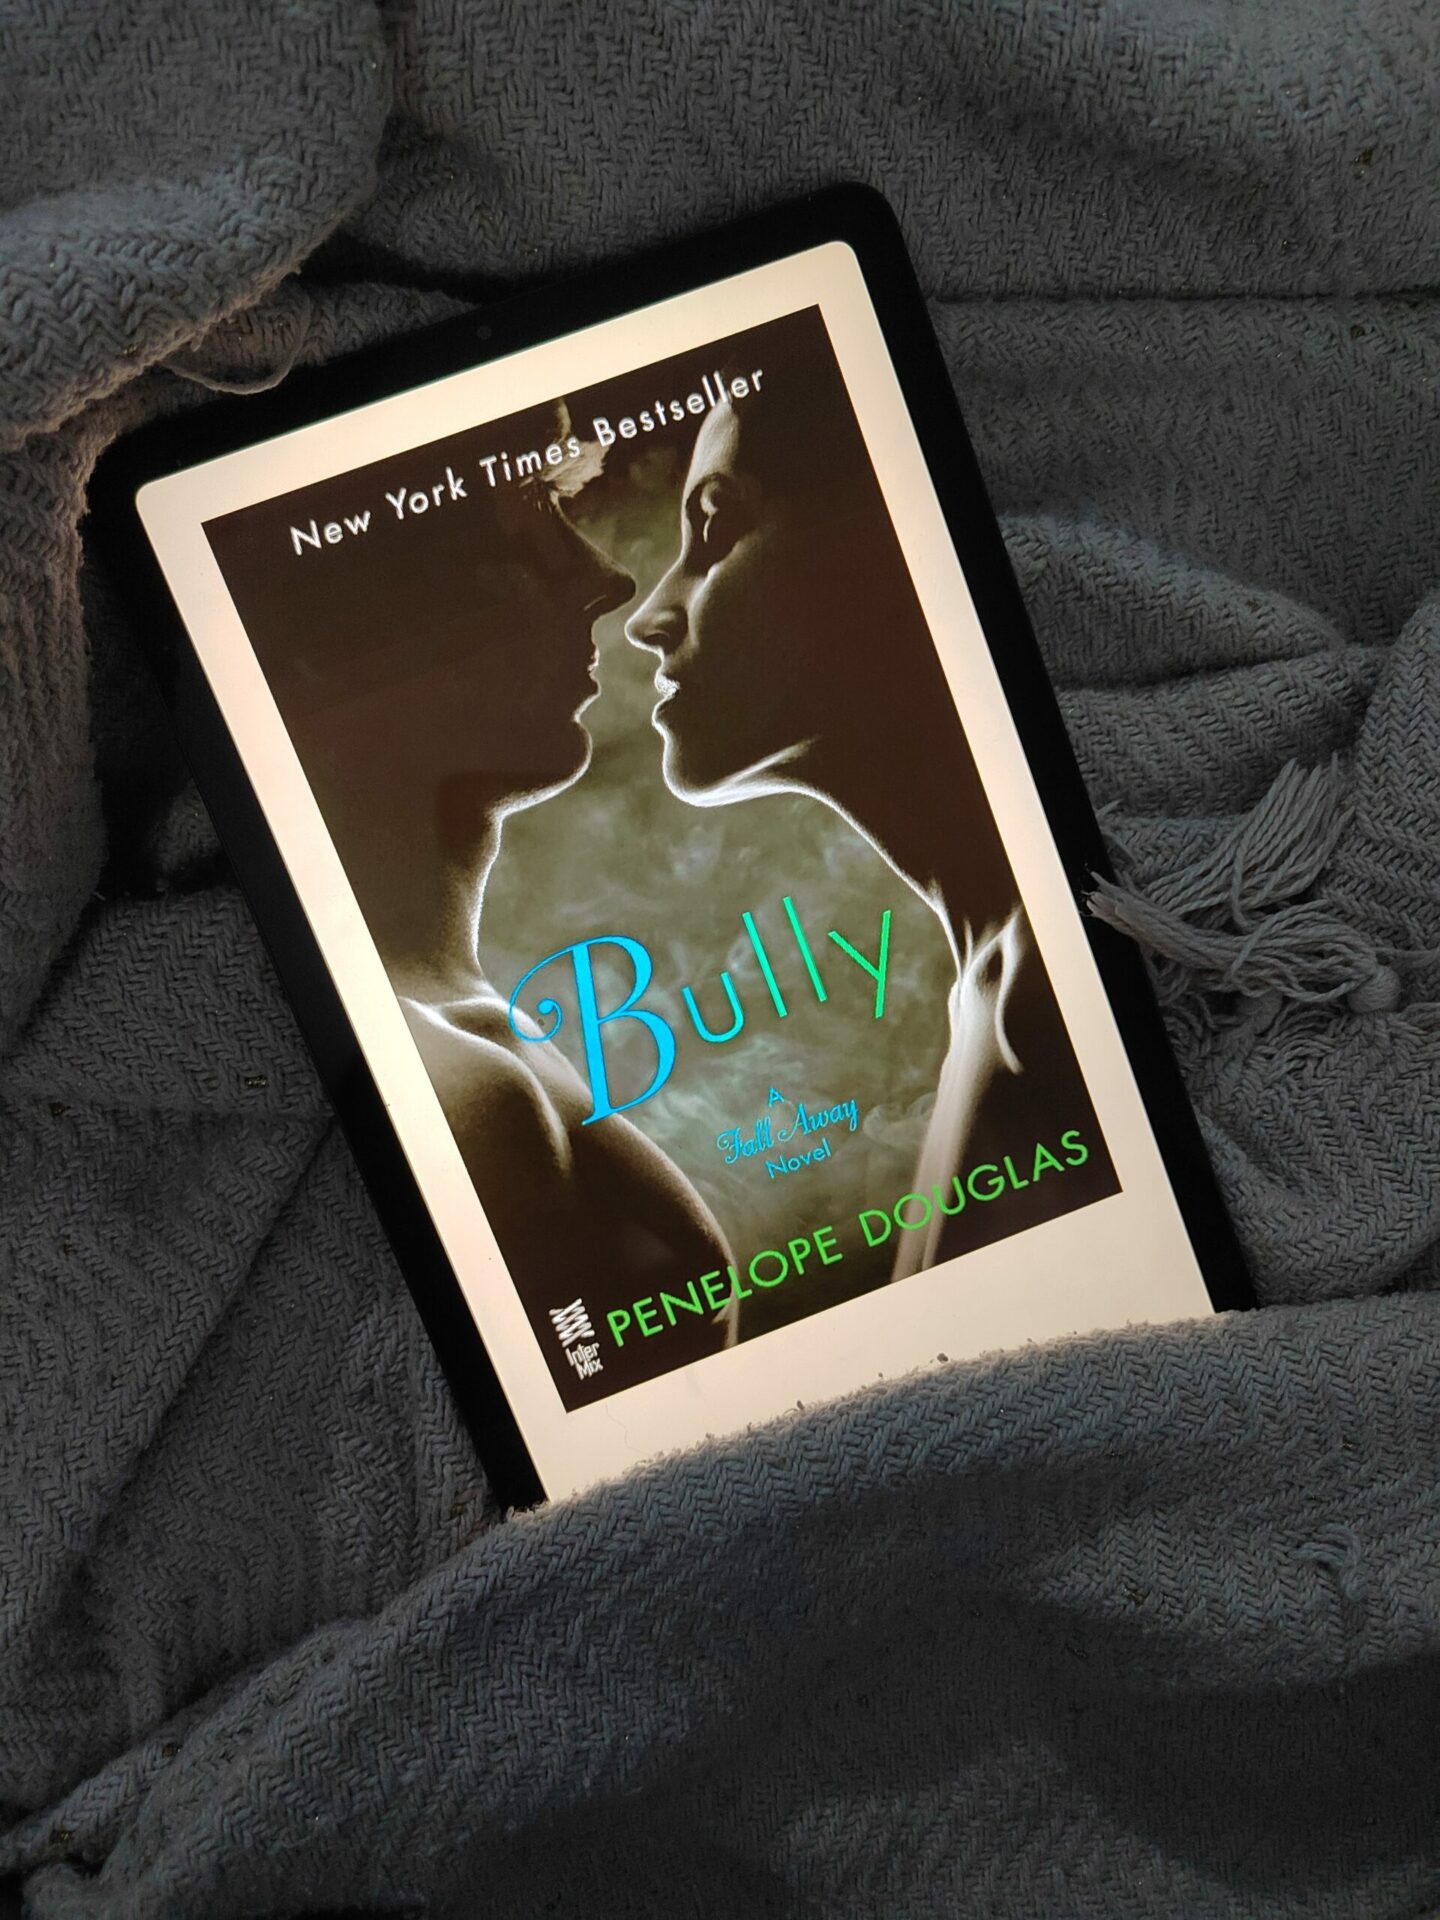 bully by penelope douglas book review